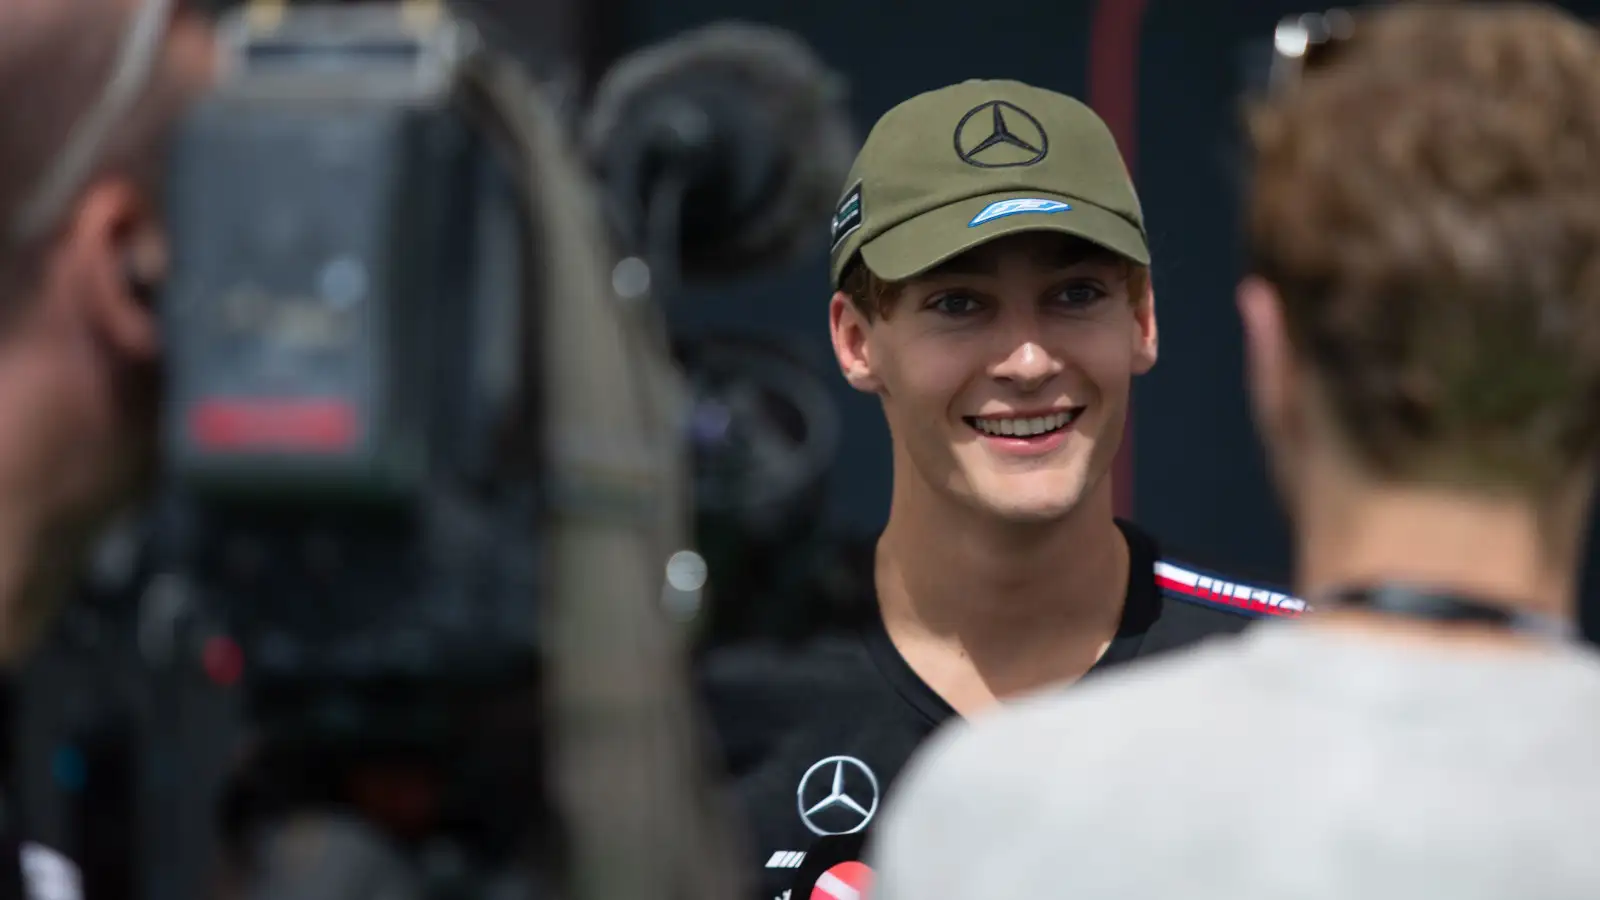 Mercedes driver George Russell gives an interview in the paddock.